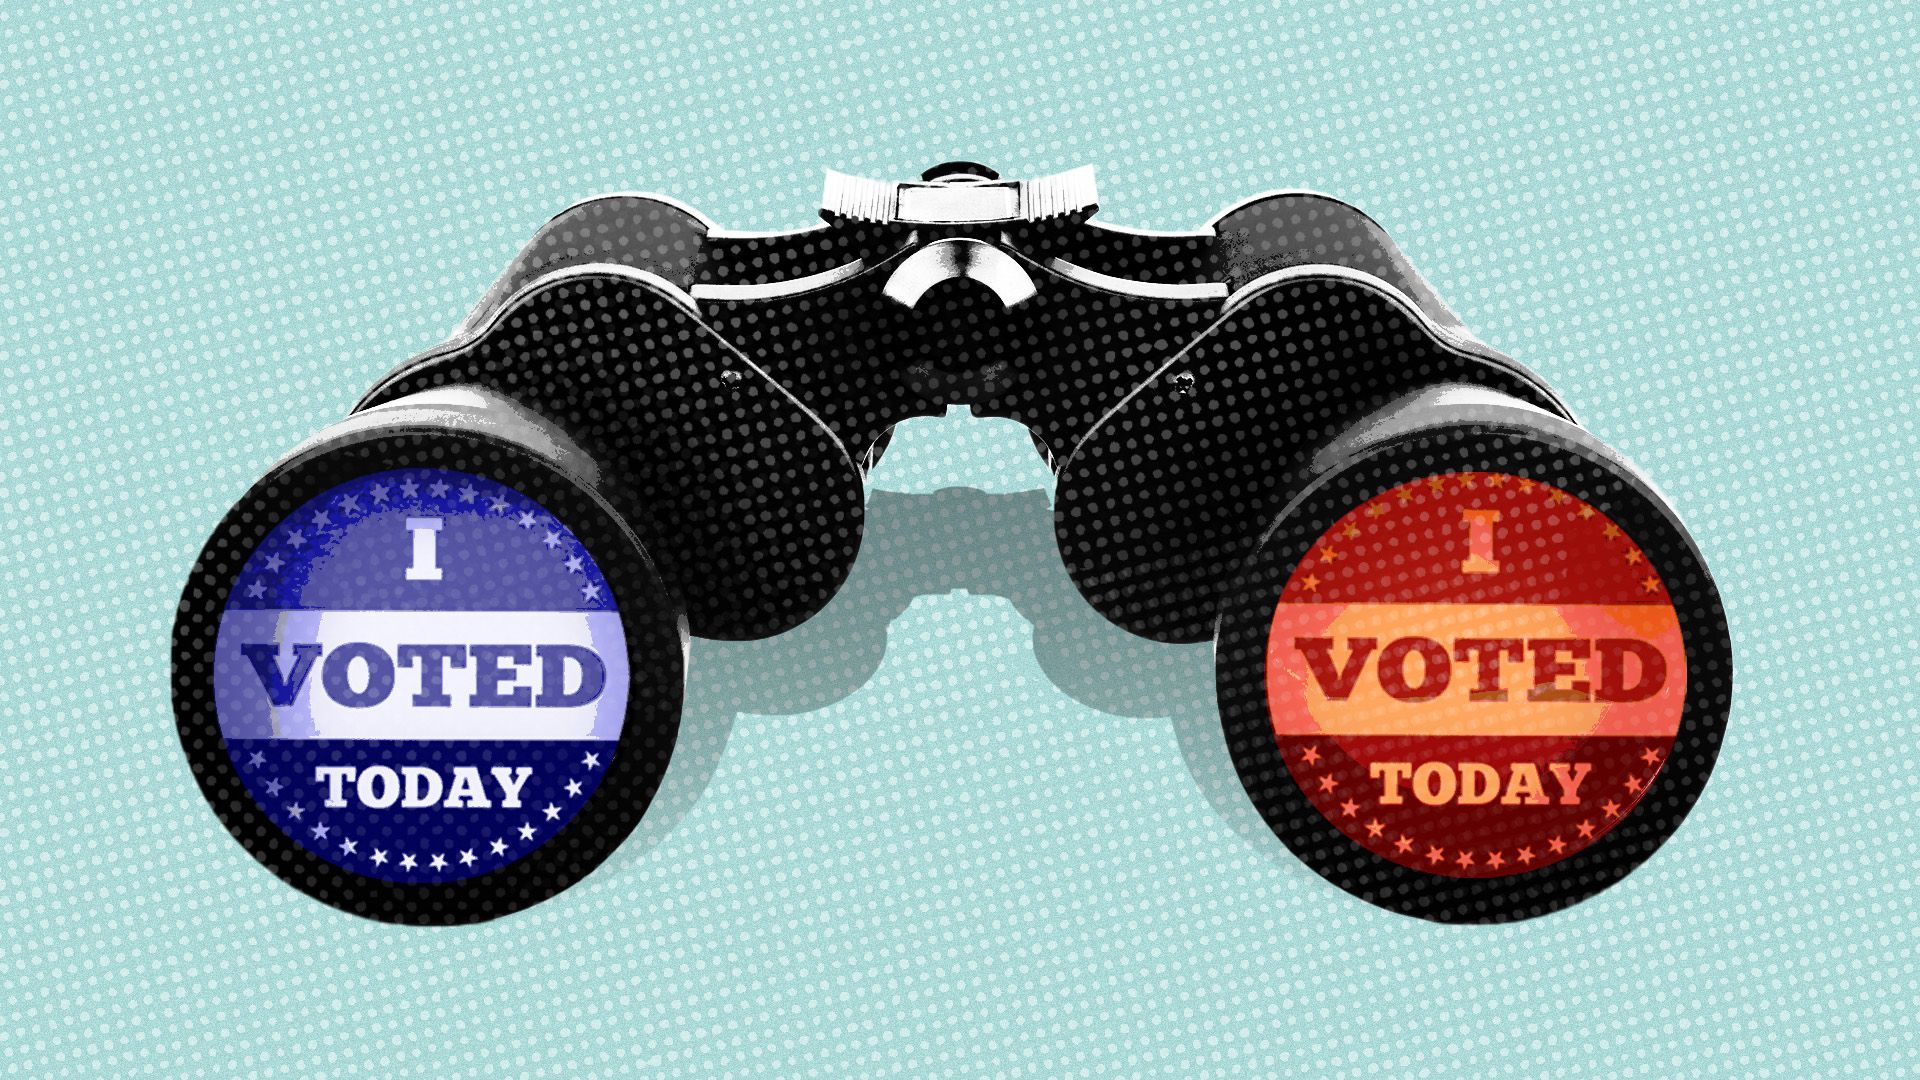 Illustration of binoculars with “I Voted Today” stickers in the lenses.